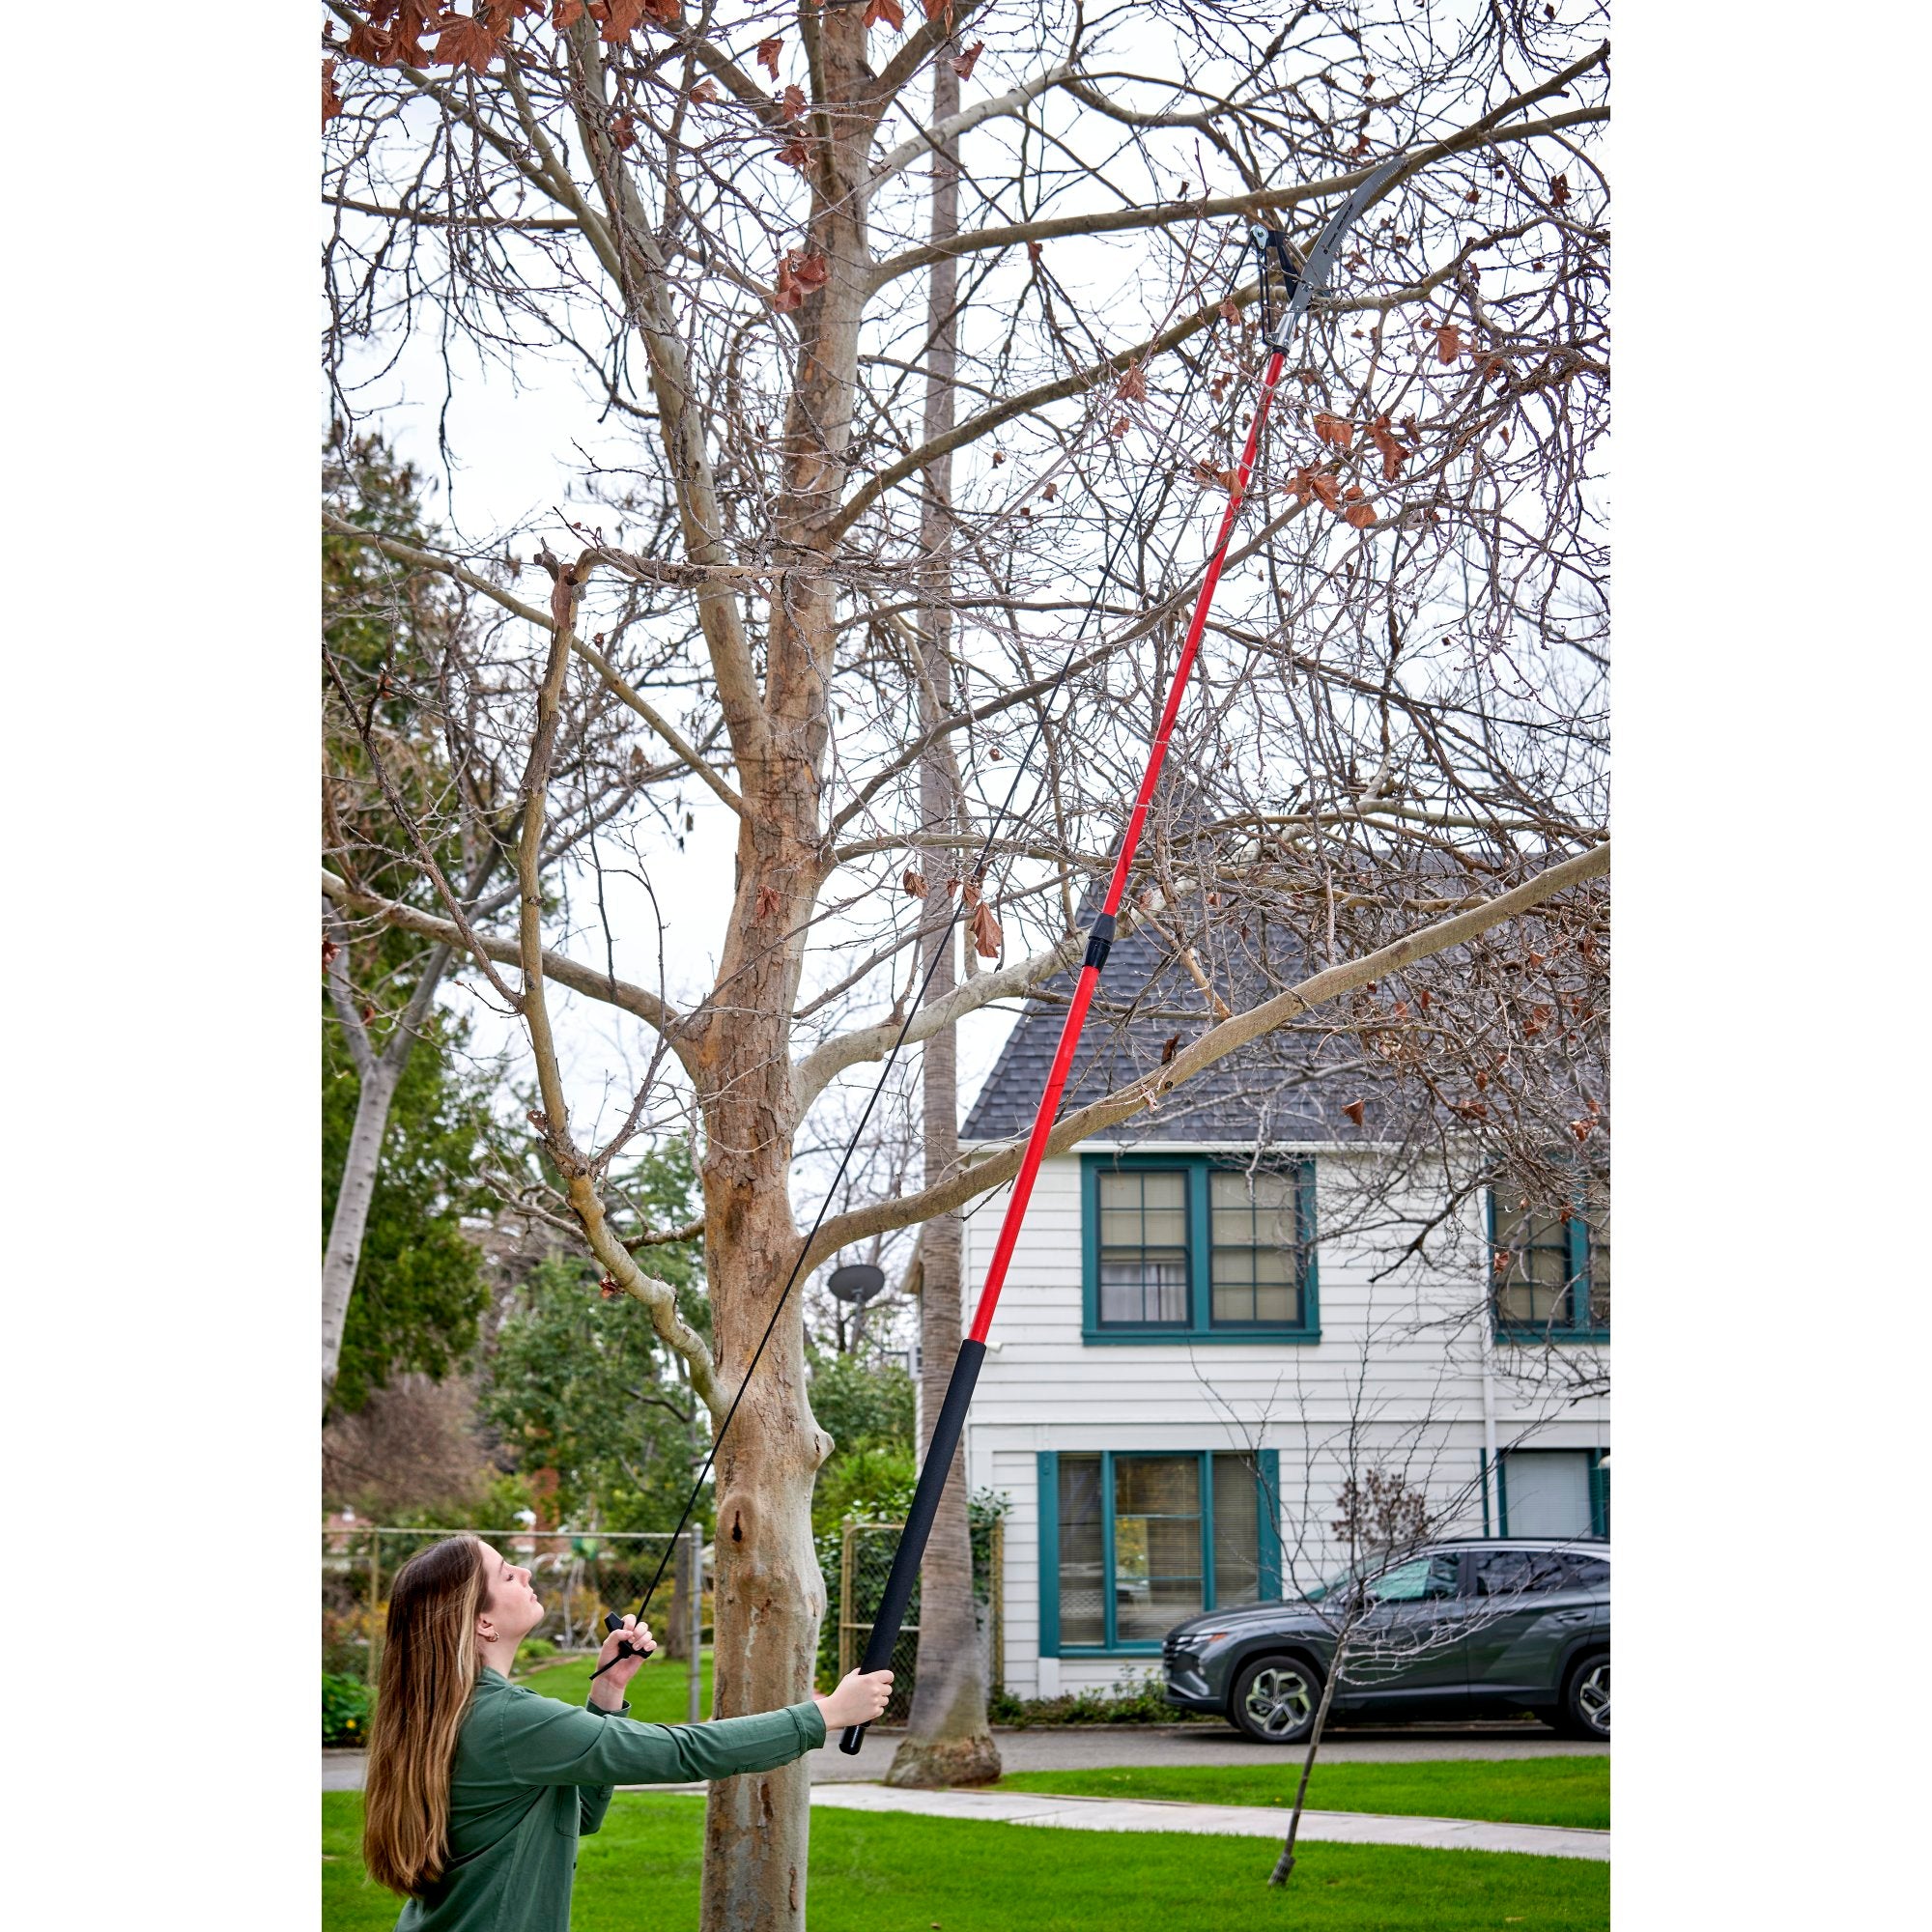 Dual Compound-Action Tree Pruner, 12 ft.